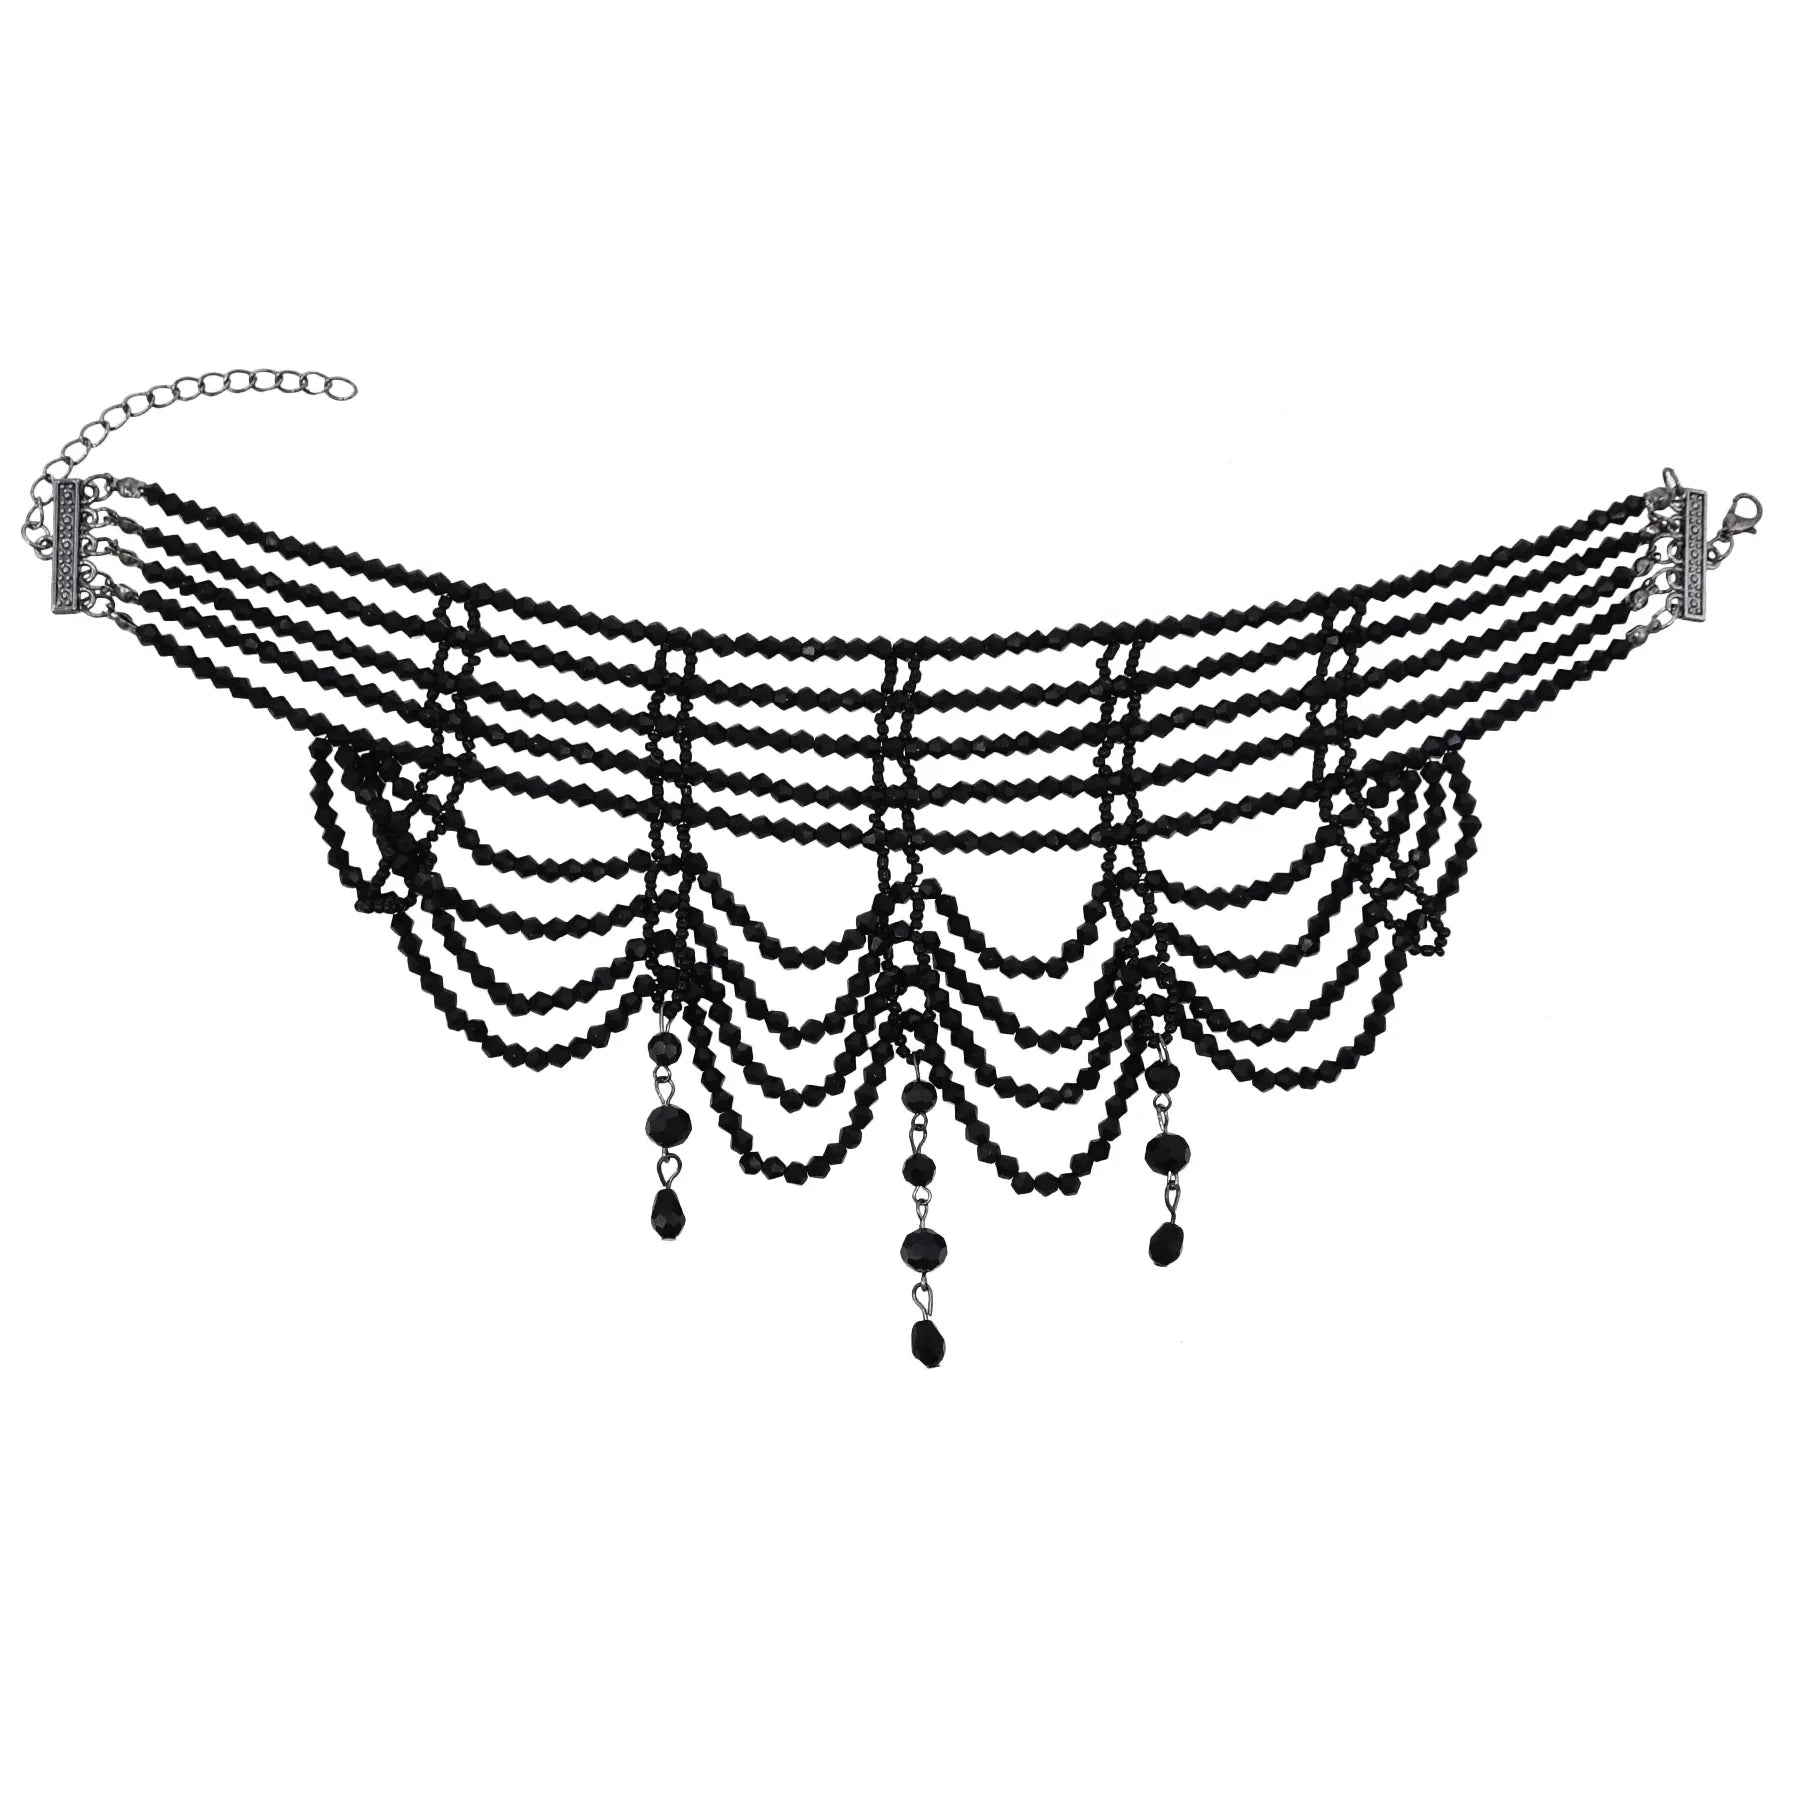 Midnight Elegance Crystal Bib Necklace | Dance in Victorian Shadows, Shine in Nightfall - A Gothic Universe - Necklaces